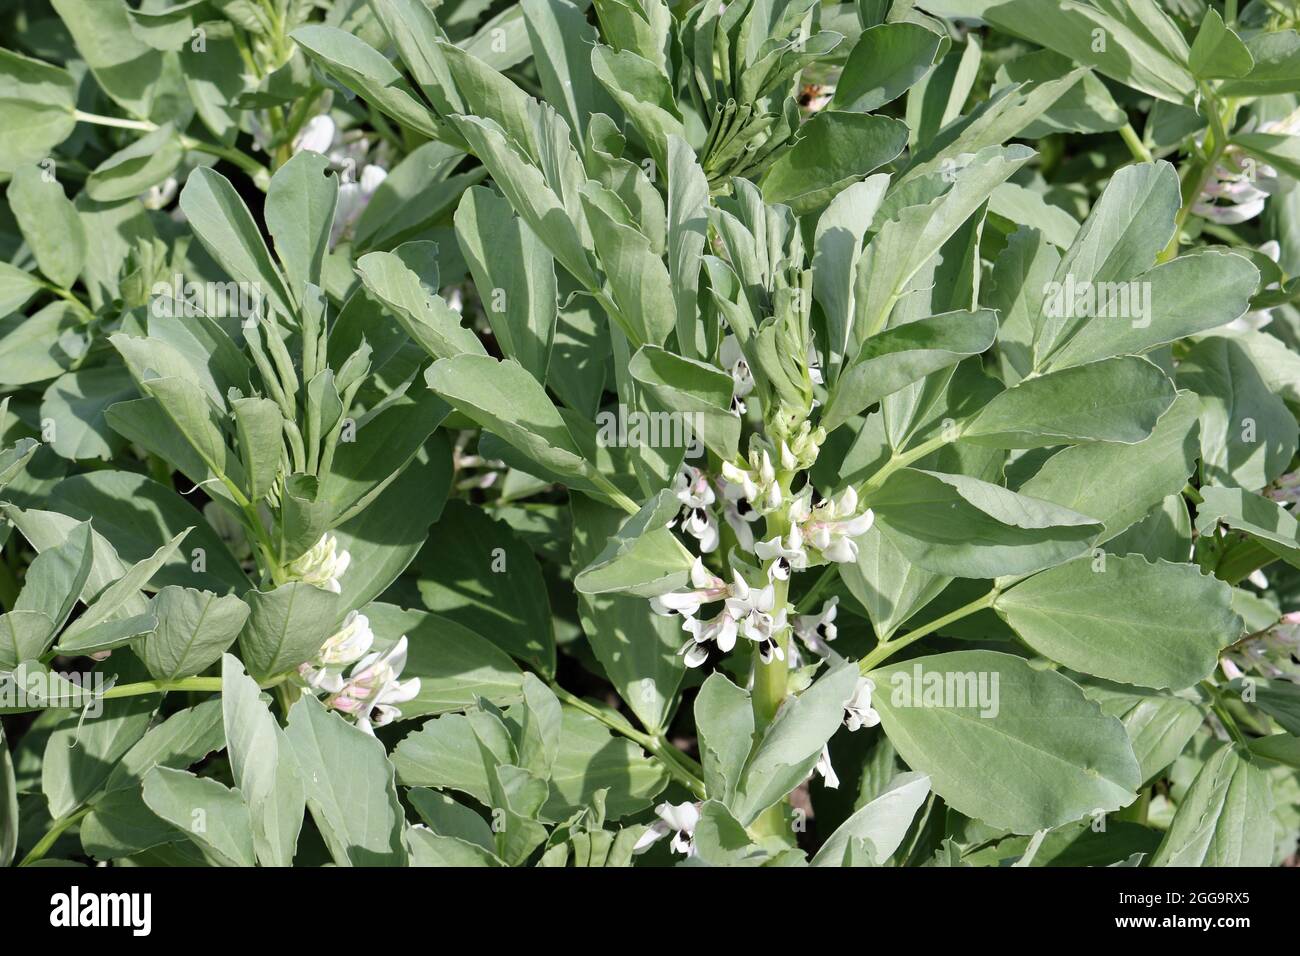 Broad bean, Vicia faba, plants with flowers in bright sunlight and no background. Stock Photo